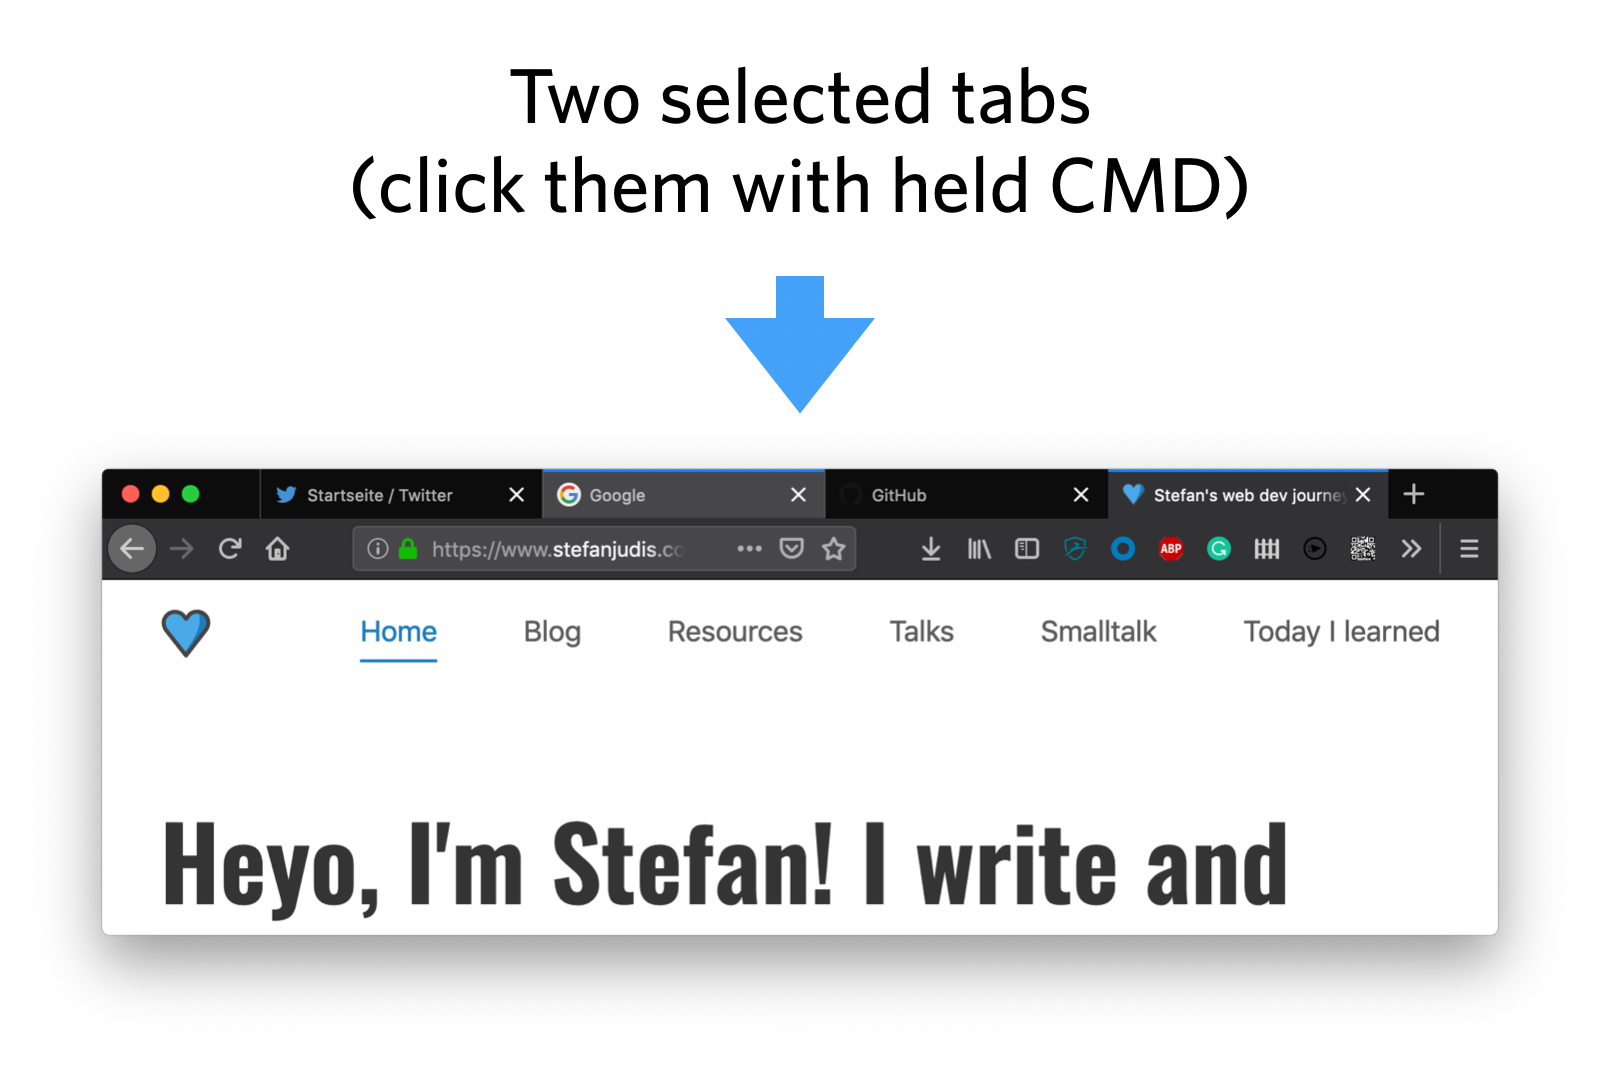 Firefox interface with two selected tabs after pressing them with hold CMD